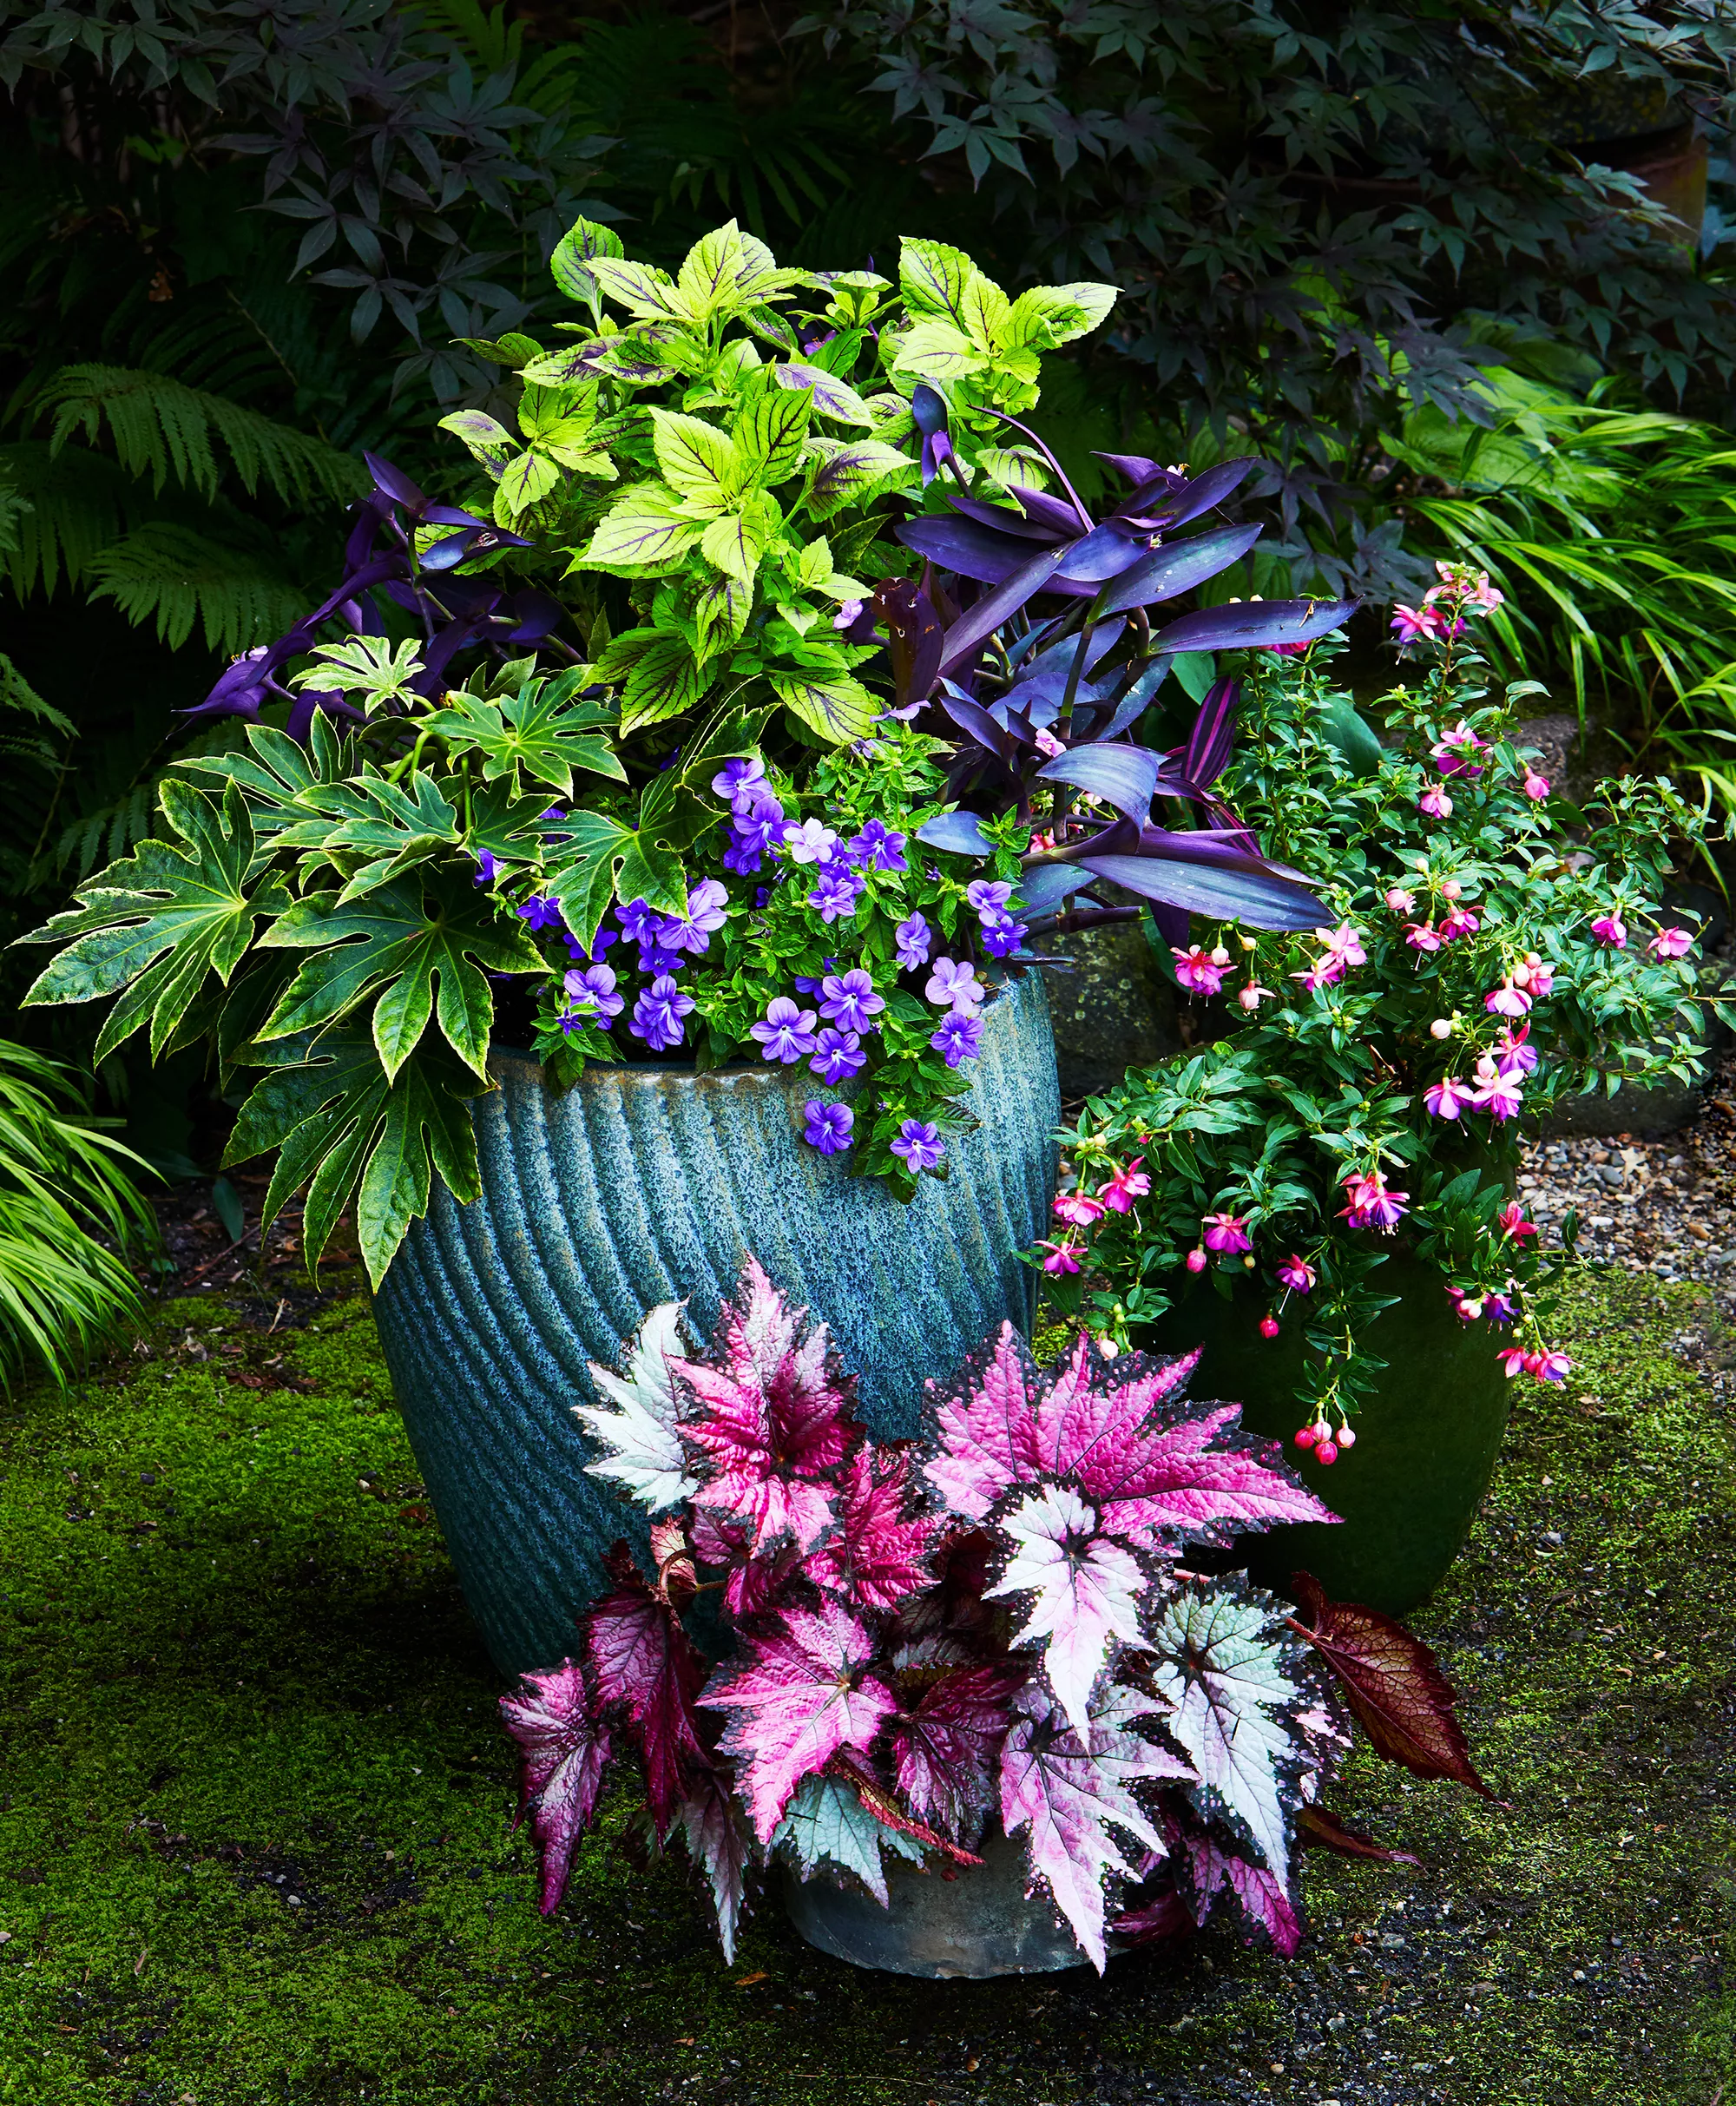 large container garden with shade plants Spider’s Web’ variegated aralia,‘Gays Delight’ coleus, ‘Purple Heart’ spiderwort, and ‘Endless Illumination’ browallia